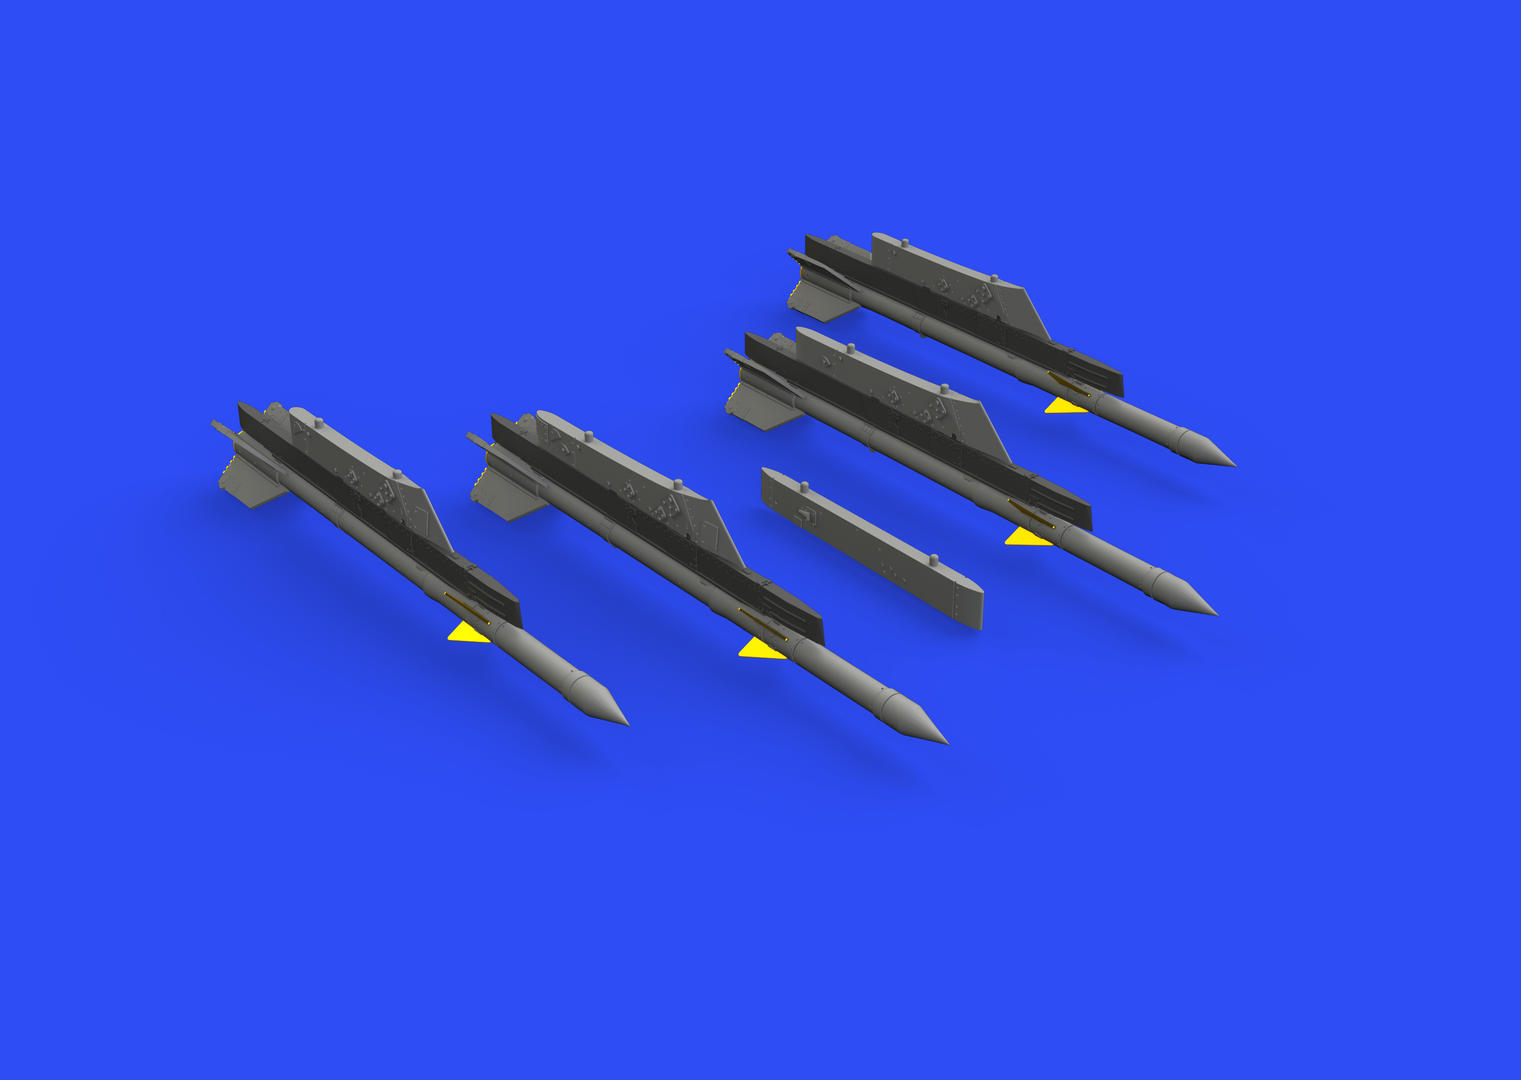 R-3R missiles w/ pylons for MiG-21 1/72 - Eduard Store